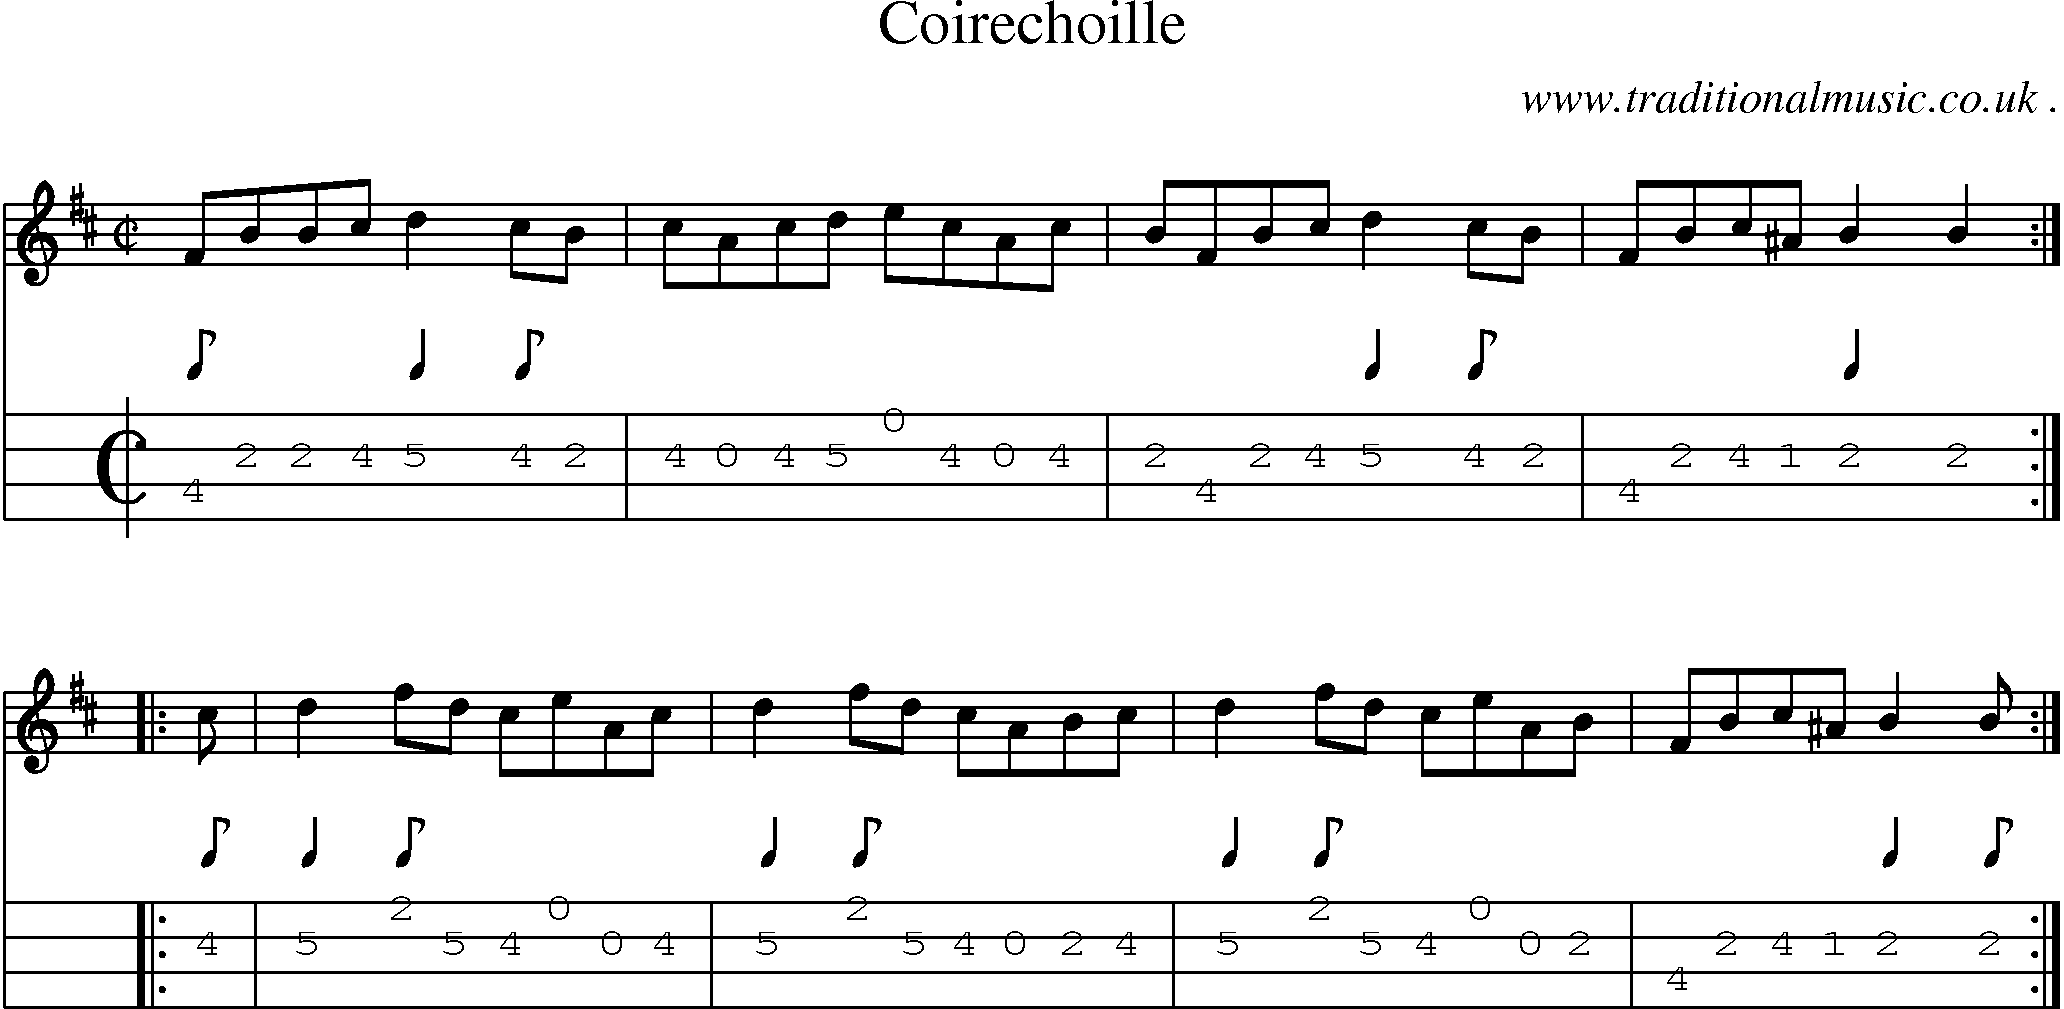 Sheet-music  score, Chords and Mandolin Tabs for Coirechoille